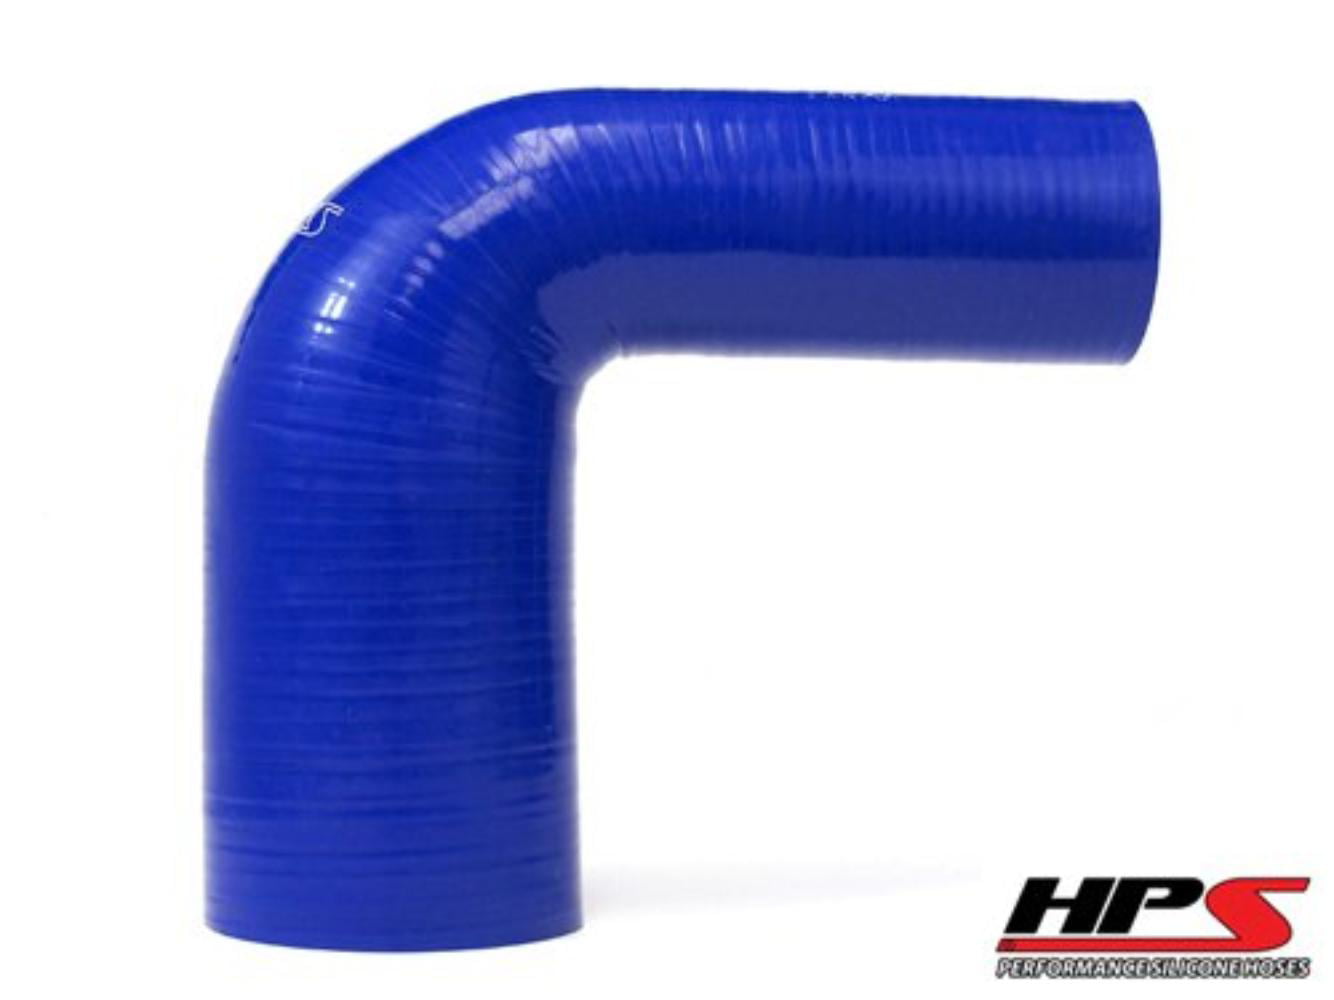 Black HPS HTSER45-325-350-BLK Silicone High Temperature 4-ply Reinforced 45 degree Elbow Reducer Coupler Hose 4 Leg Length on each side 3-1/4  3-1/2 ID 30 PSI Maximum Pressure 